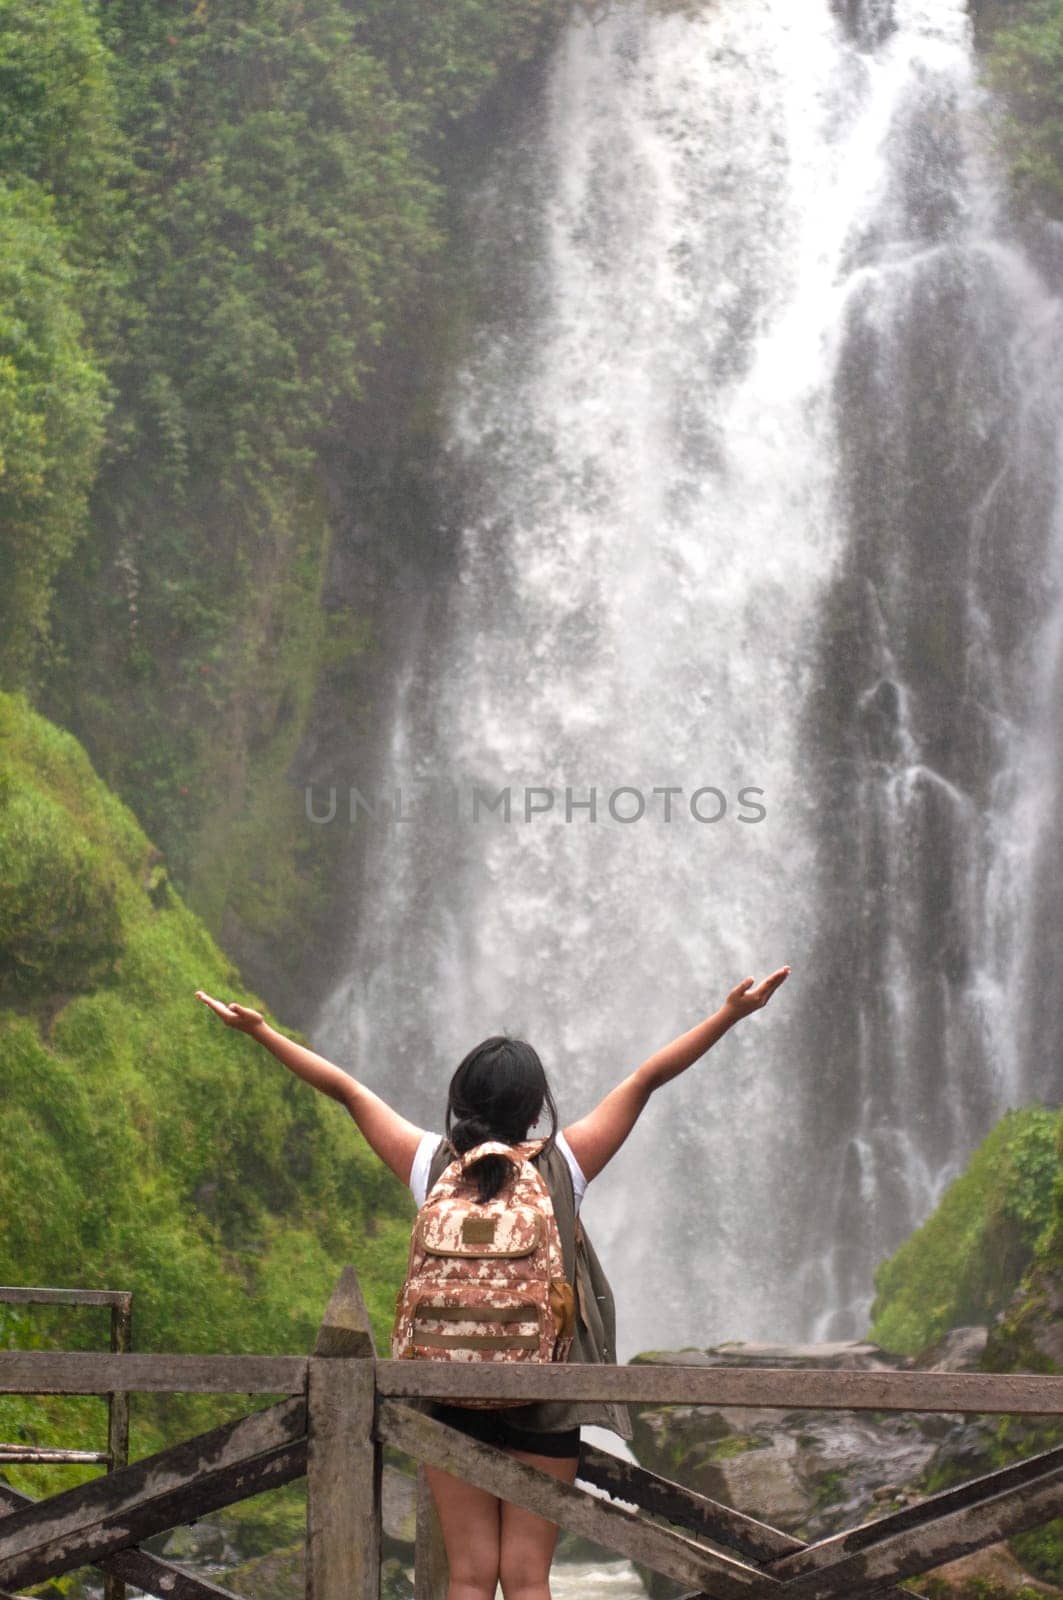 A lone traveler enjoys a moment of tranquility as she stands with arms outstretched facing a powerful waterfall surrounded by vibrant green foliage. by Raulmartin